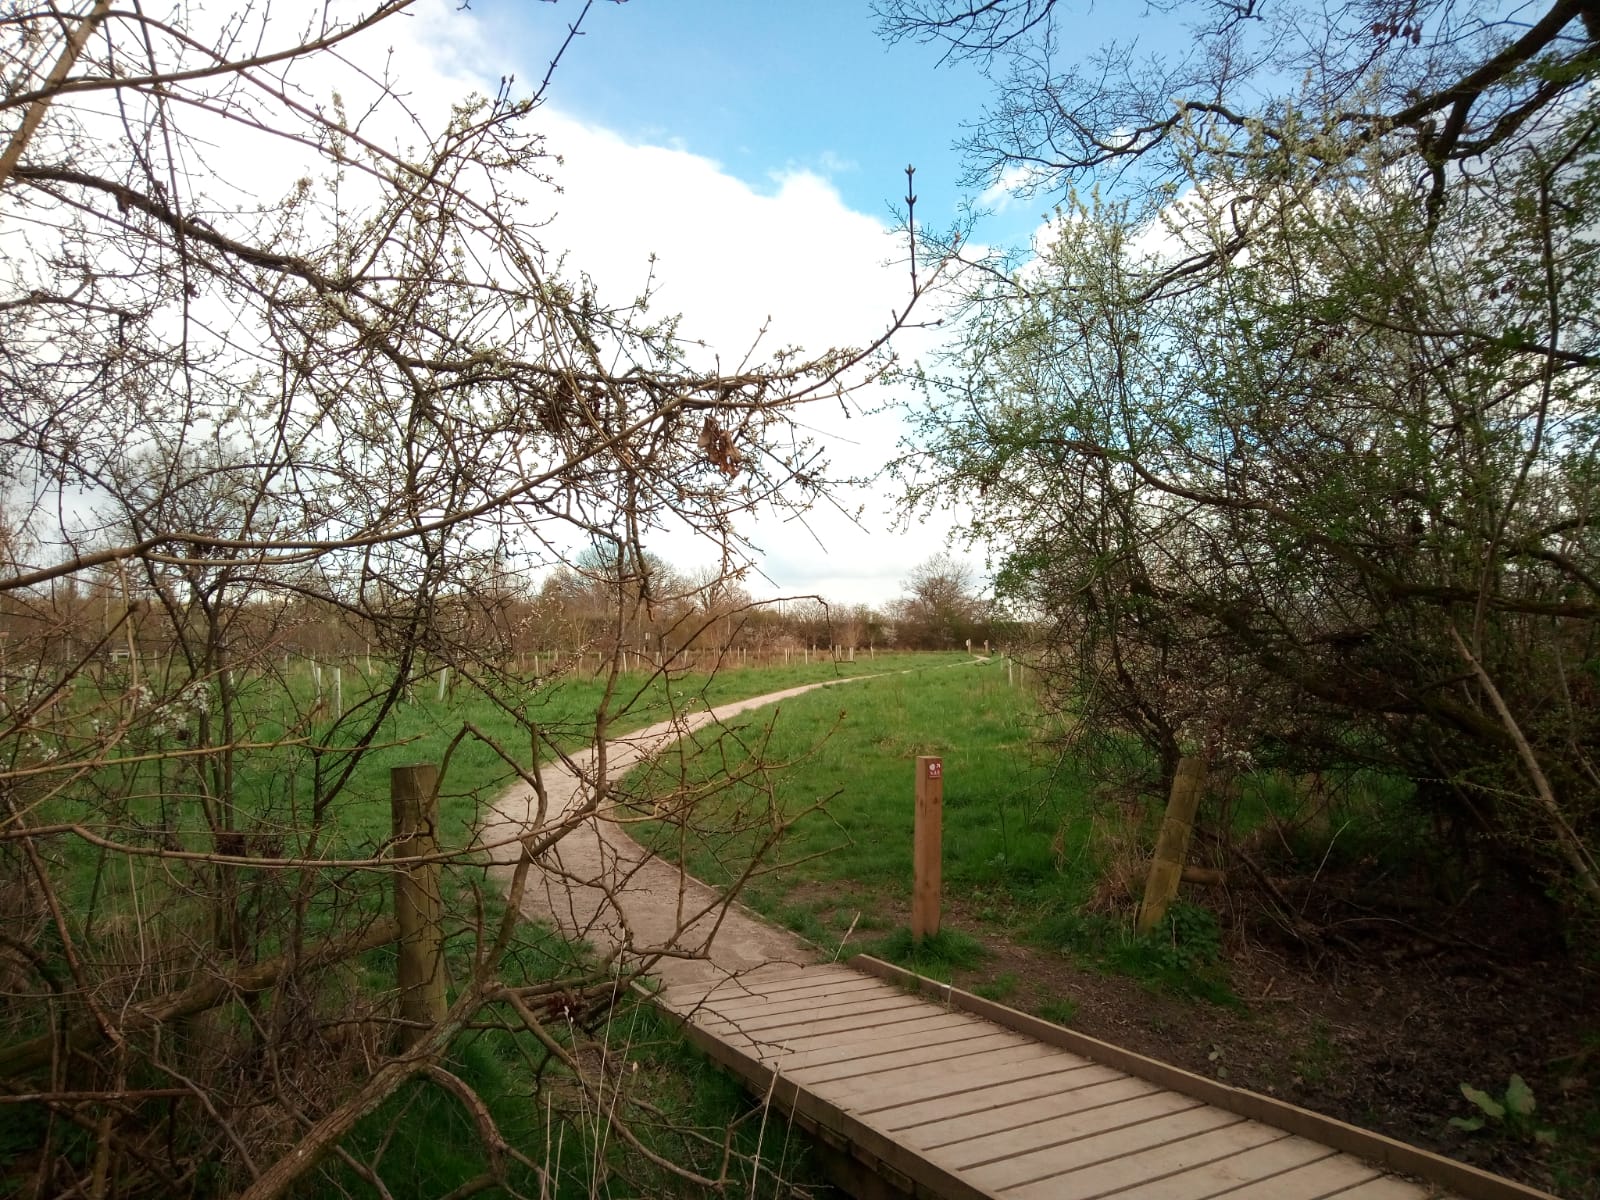 Wooden boardwalk leading out of the trees into open grassland